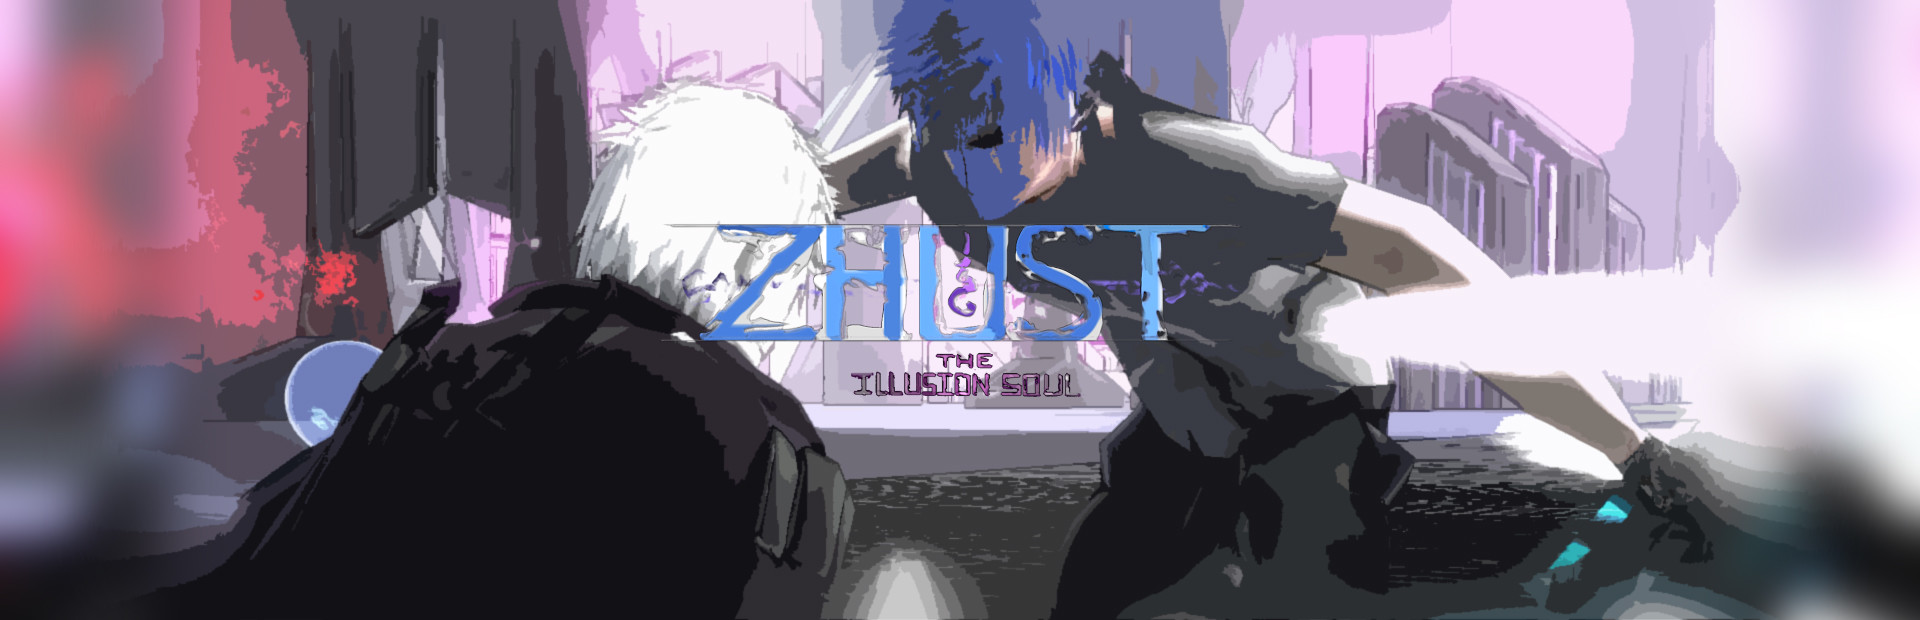 ZHUST - THE ILLUSION SOUL cover image